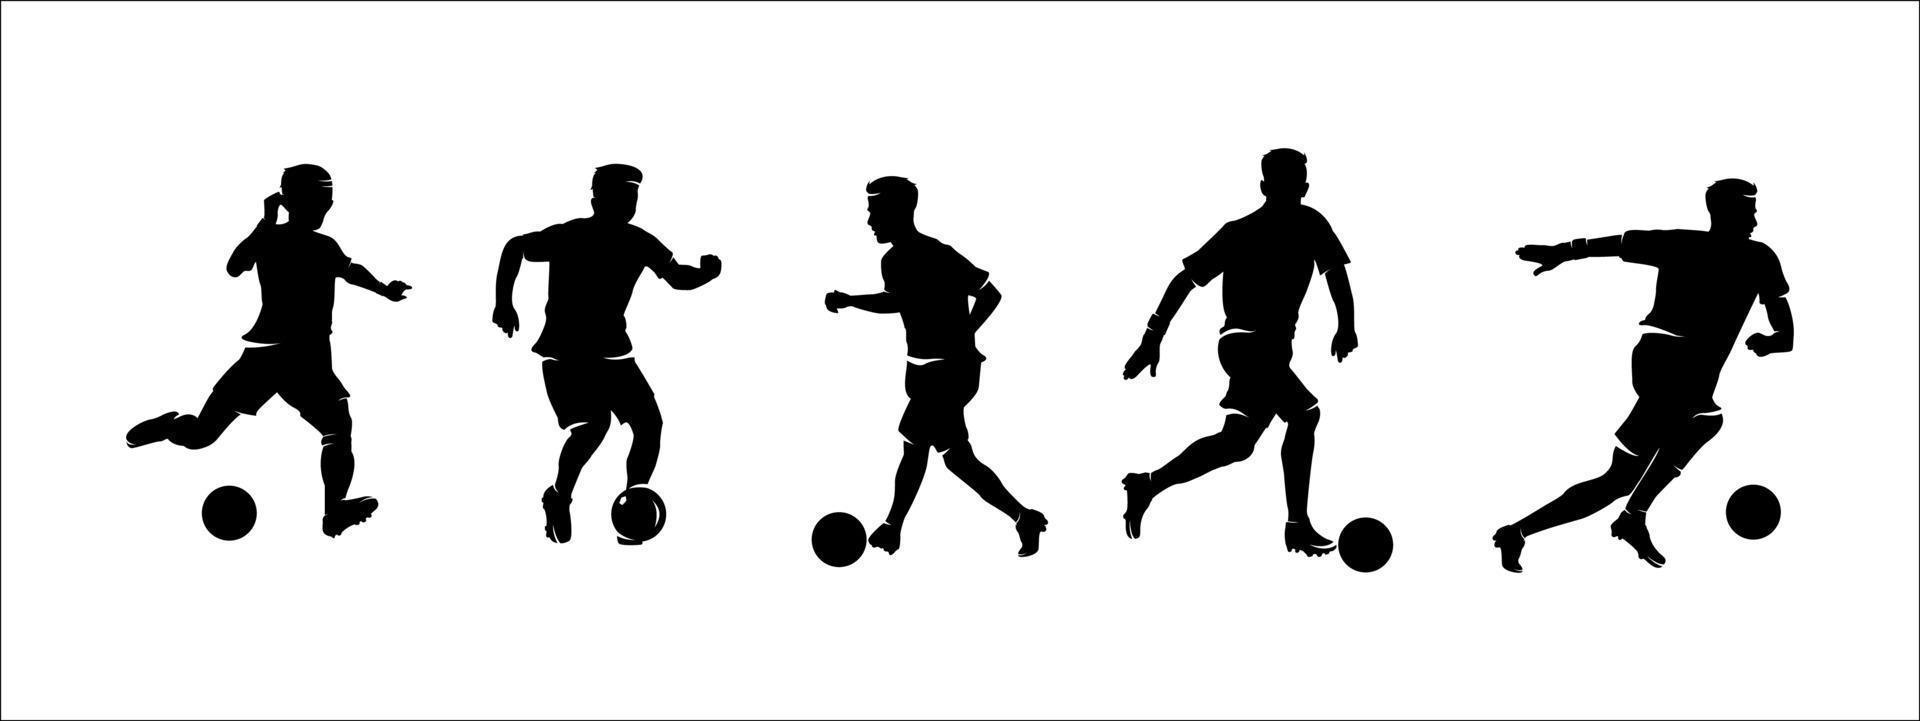 football player silhouette collection vector